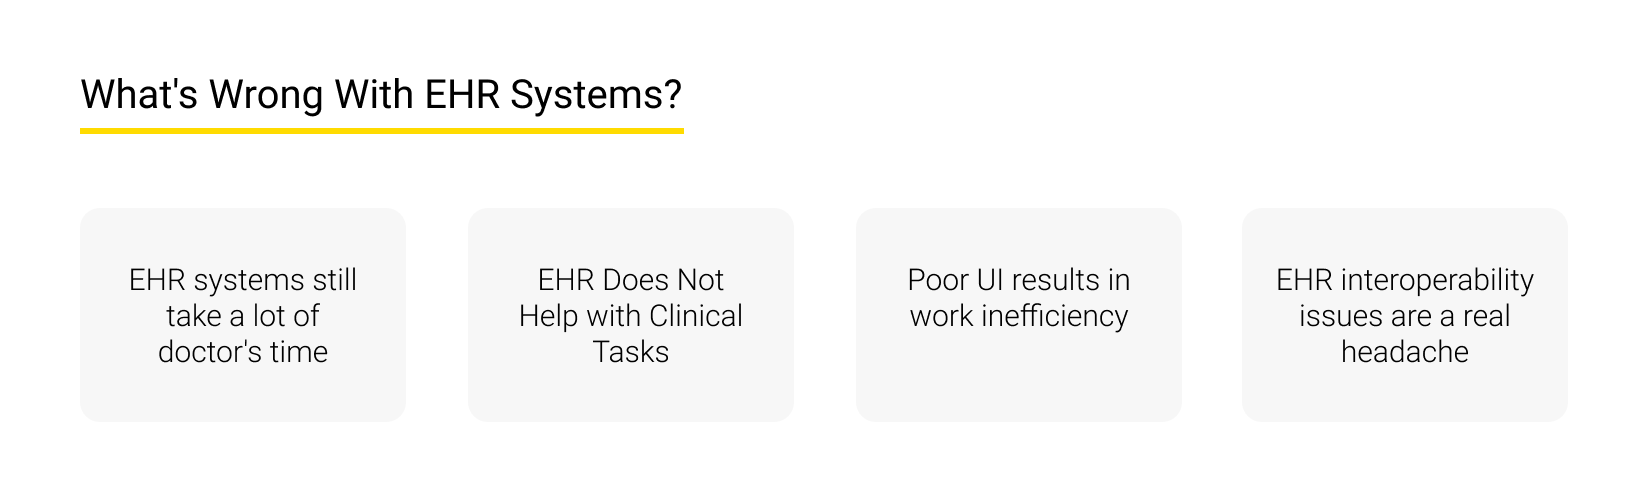 What-s Wrong With EHR Systems